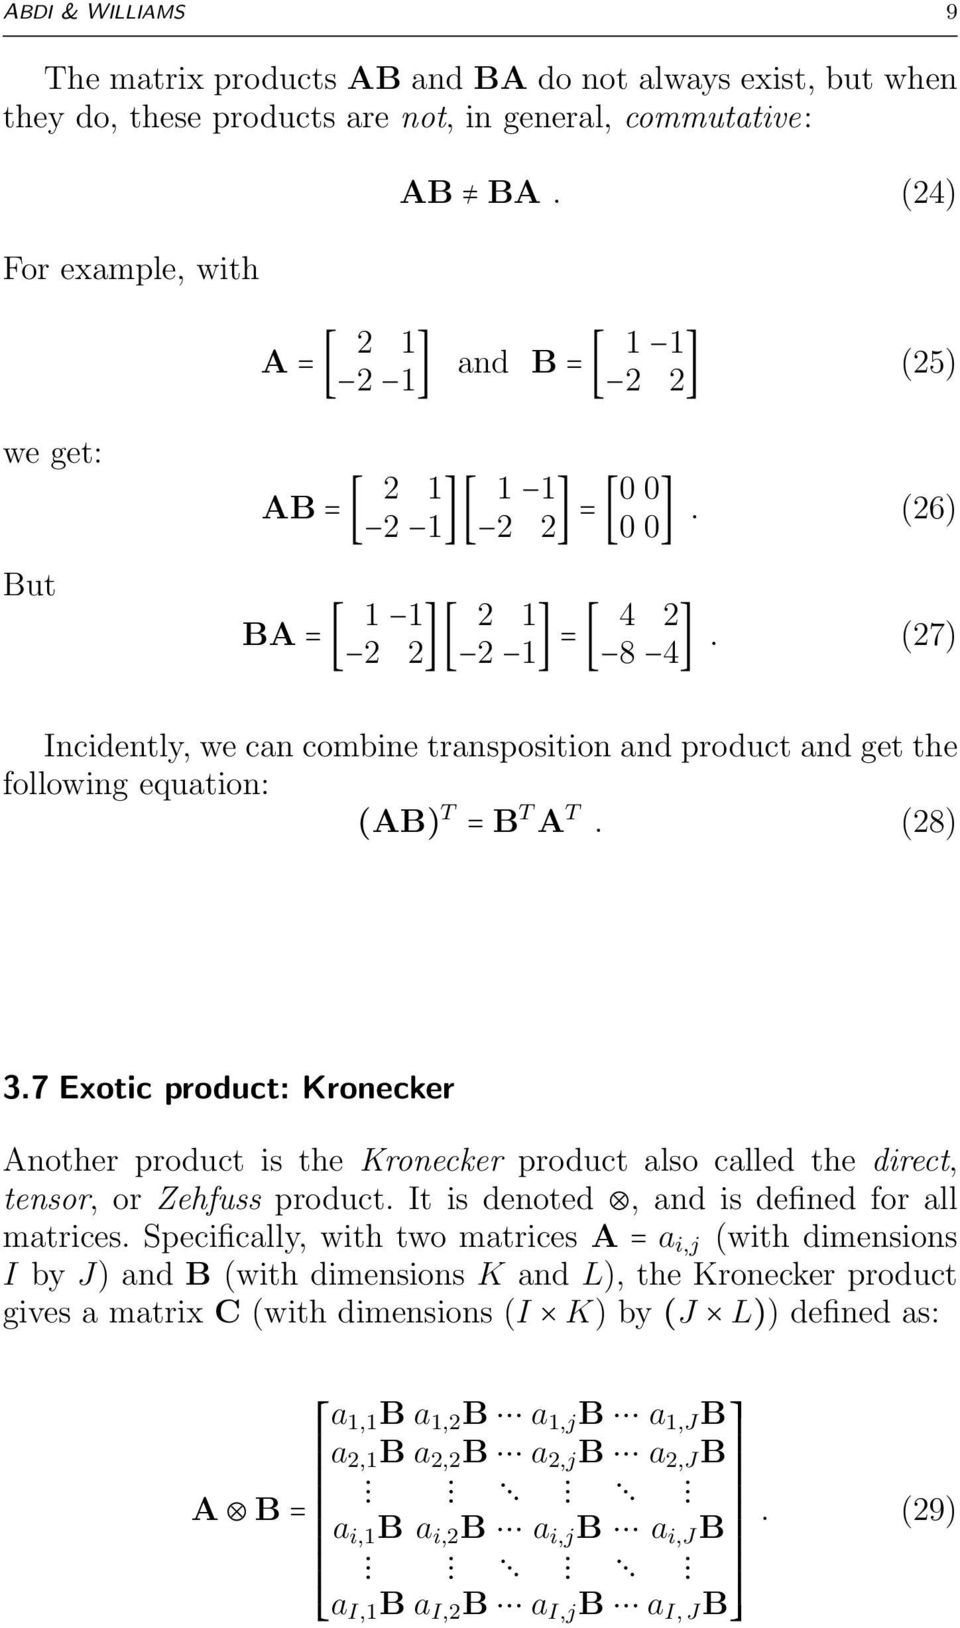 (8) 3.7 Exotic product: Kronecker Another product is the Kronecker product also called the direct, tensor, or Zehfuss product. It is denoted, and is defined for all matrices.